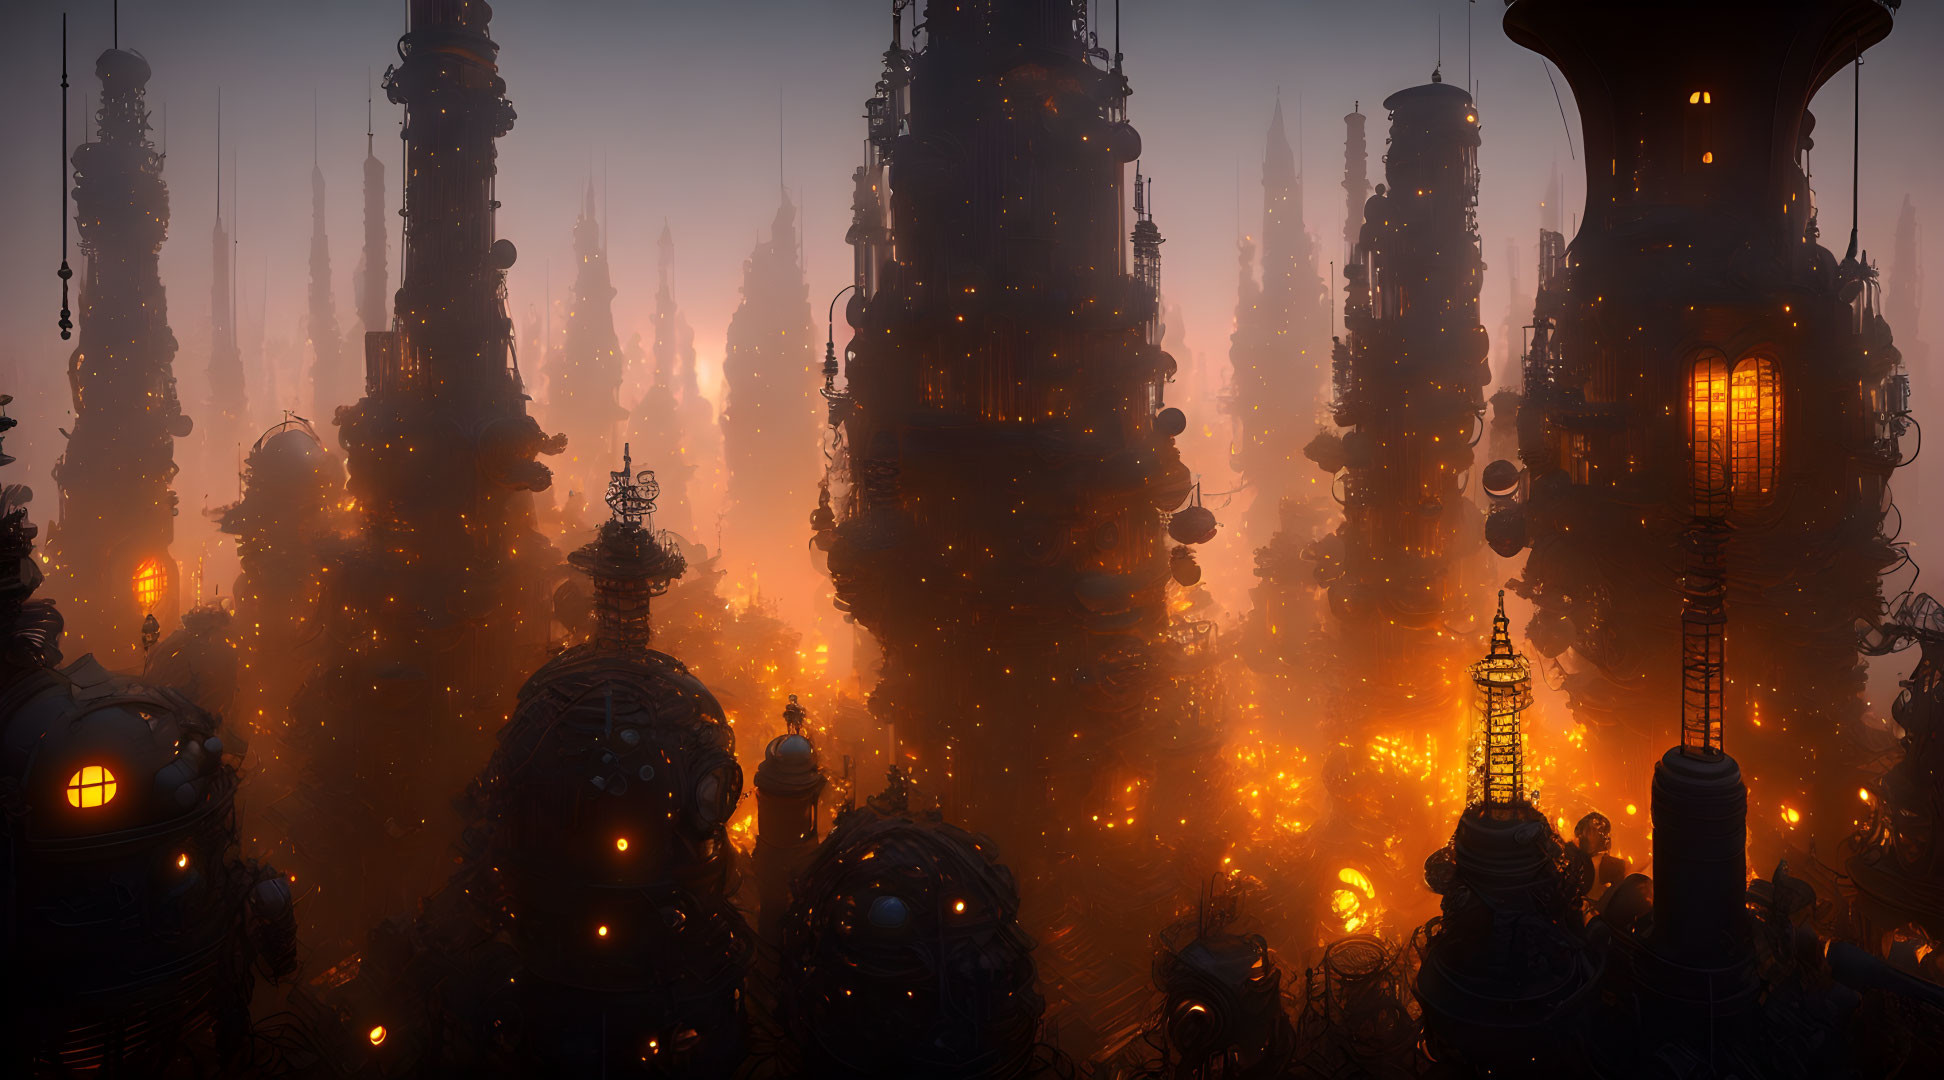 Mysterious cityscape with towering structures and warm glow against hazy backdrop